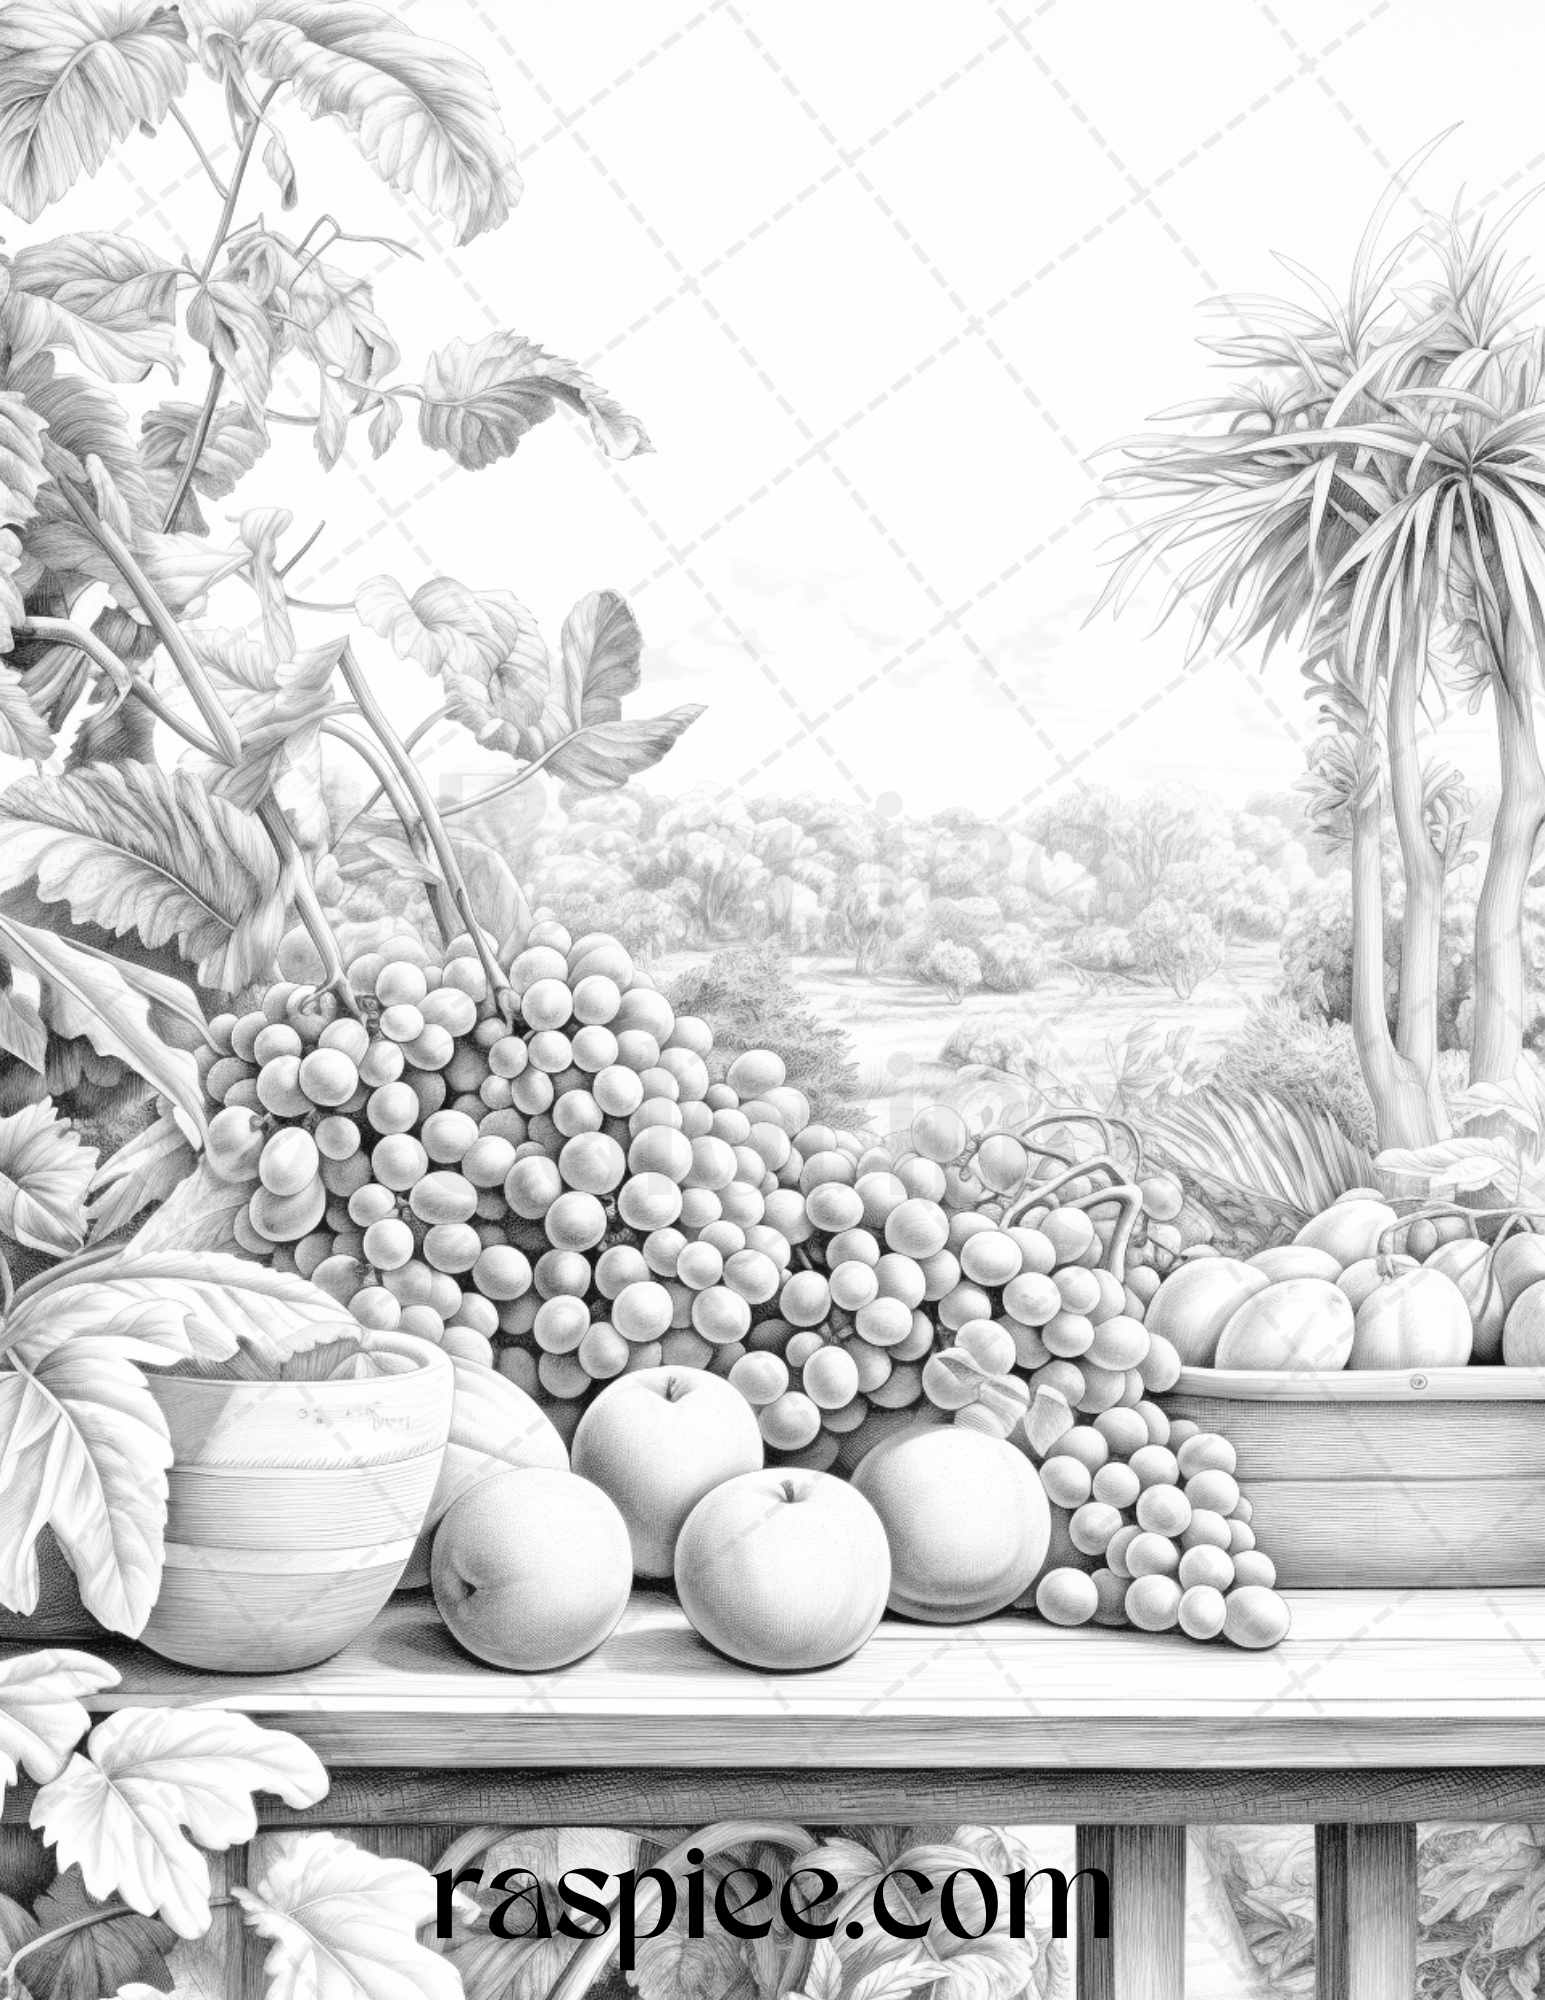 Relaxing fruit garden grayscale coloring pages printable for adults p â coloring